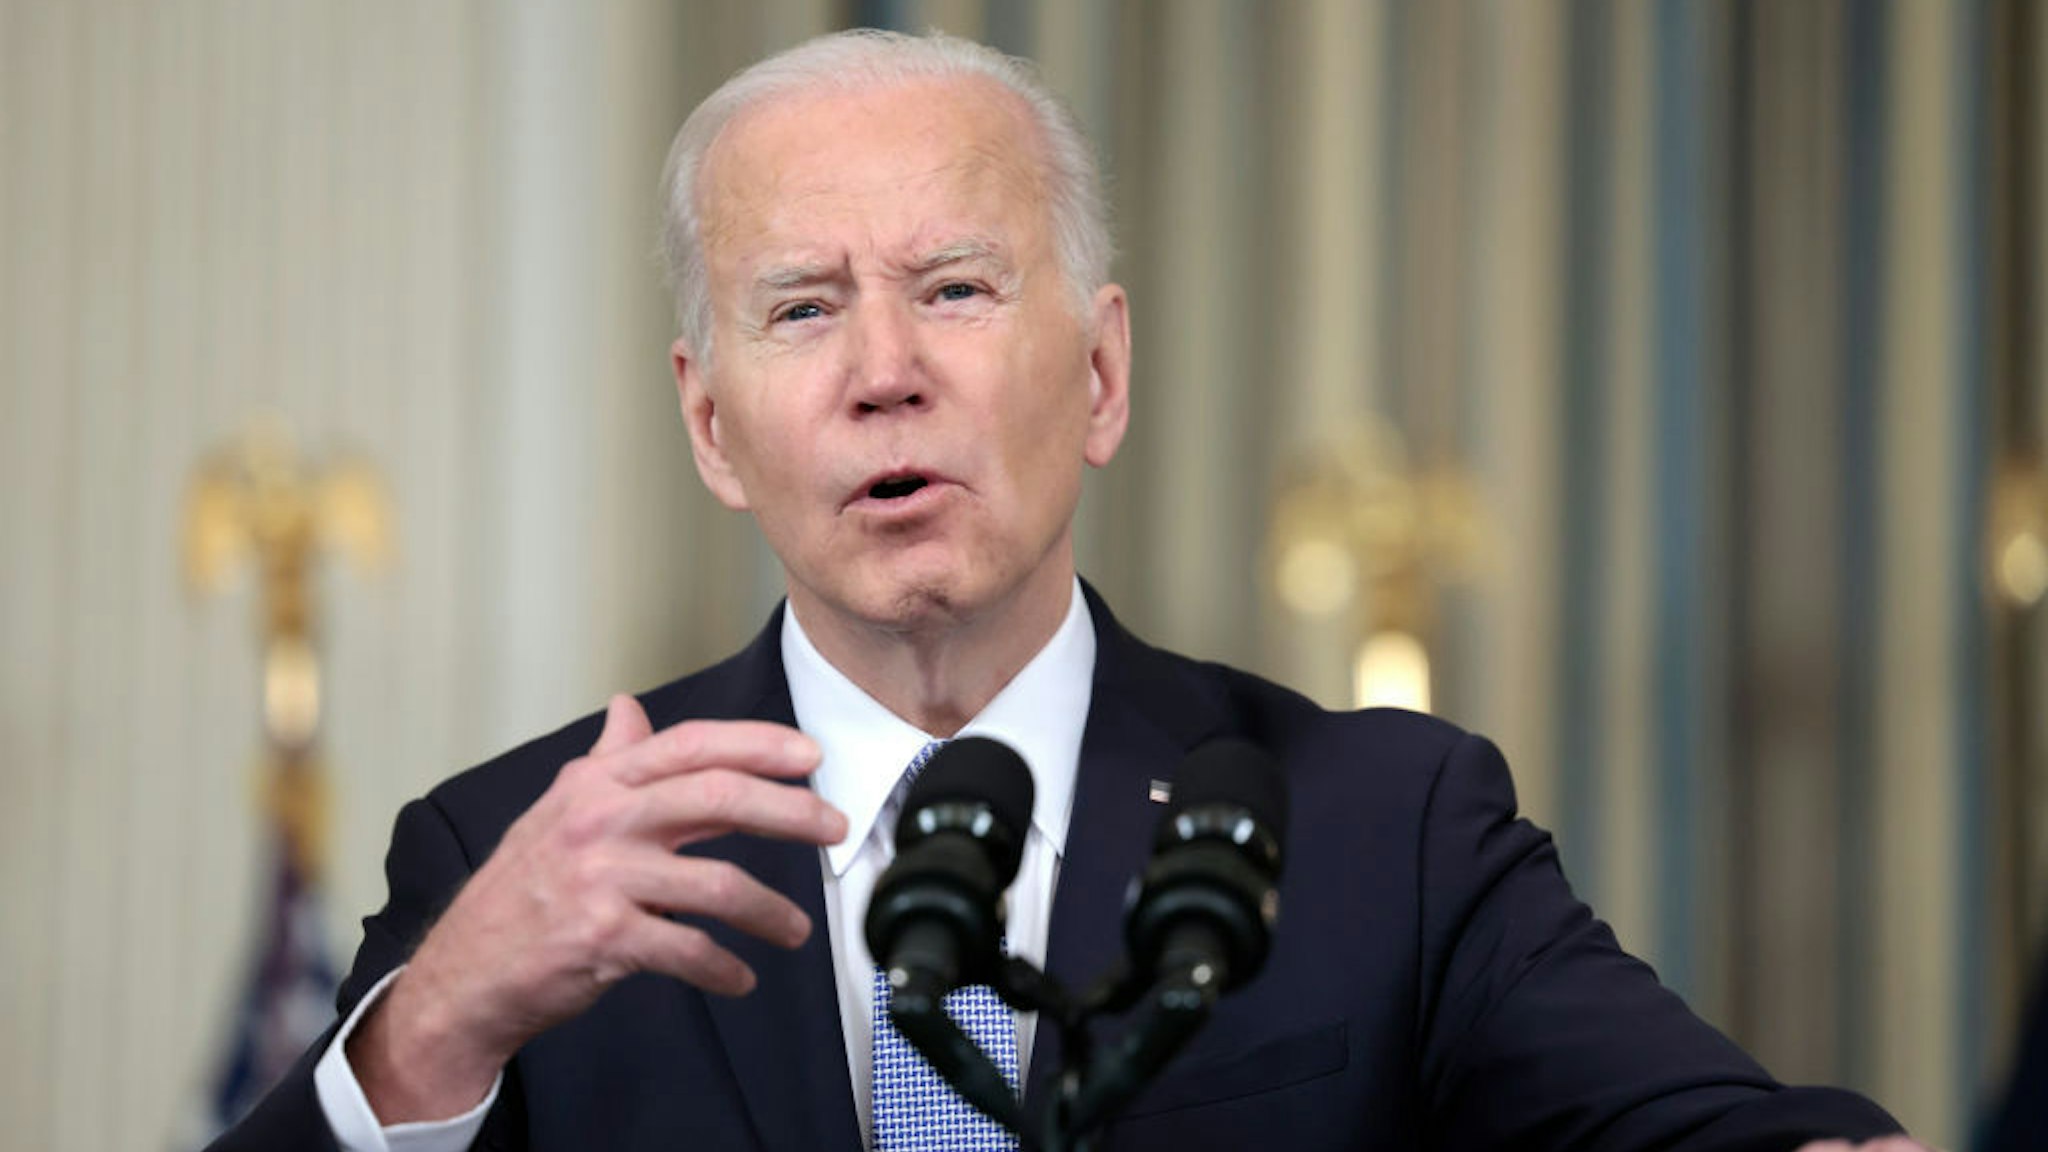 WASHINGTON, DC - APRIL 01: U.S. President Joe Biden gestures as he delivers remarks on the jobs report for the month of March from the State Dining Room of the White House on April 01, 2022 in Washington, DC. The U.S. economy gained an additional 431,000 jobs in March and the unemployment rate fell to 3.6%. (Photo by Anna Moneymaker/Getty Images)